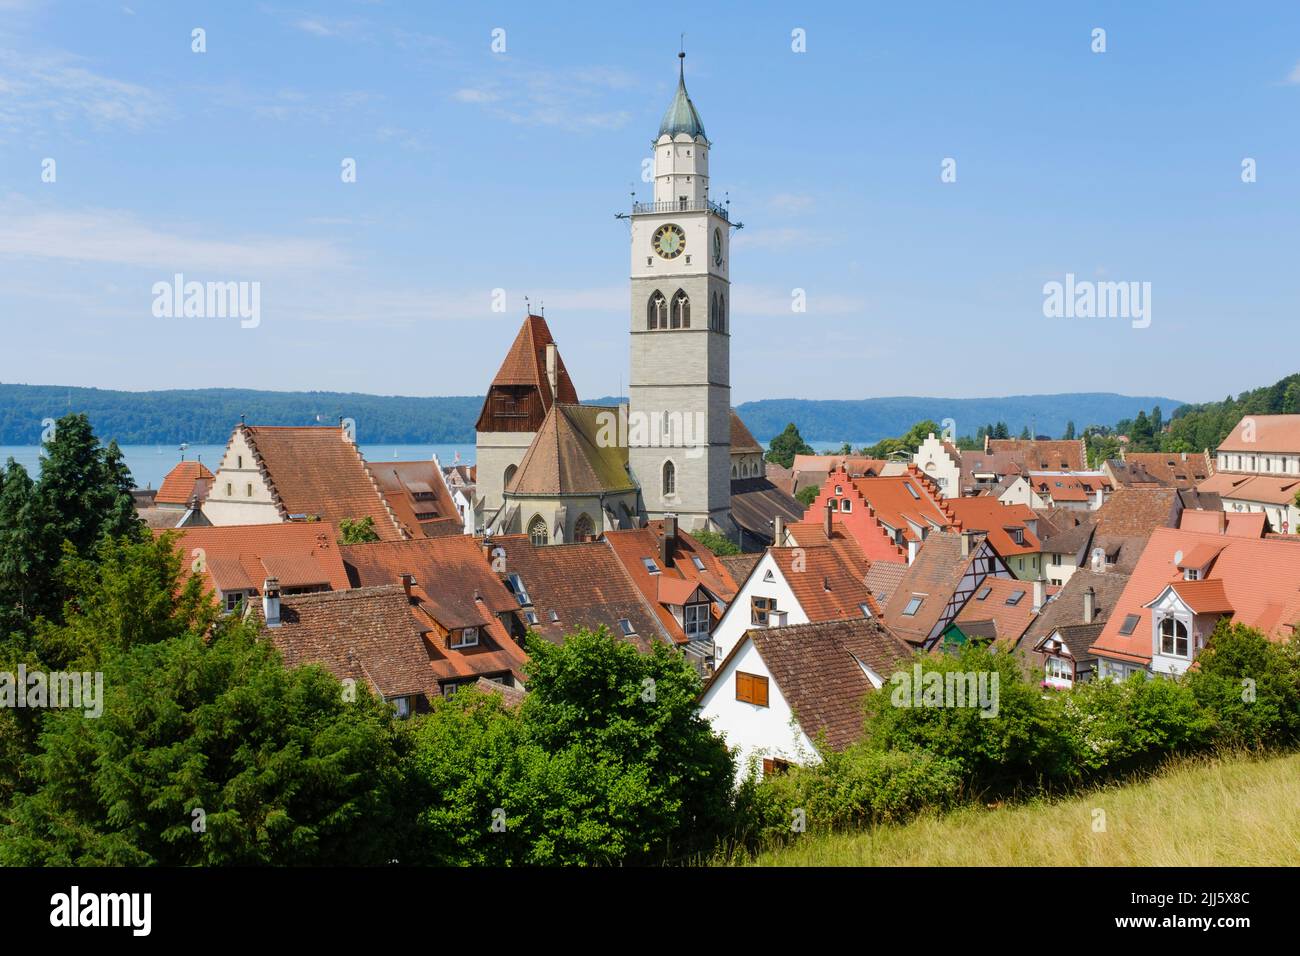 Germany, Baden-Wurttemberg, Uberlingen, Bell tower of Sankt Nikolaus church and surrounding houses Stock Photo